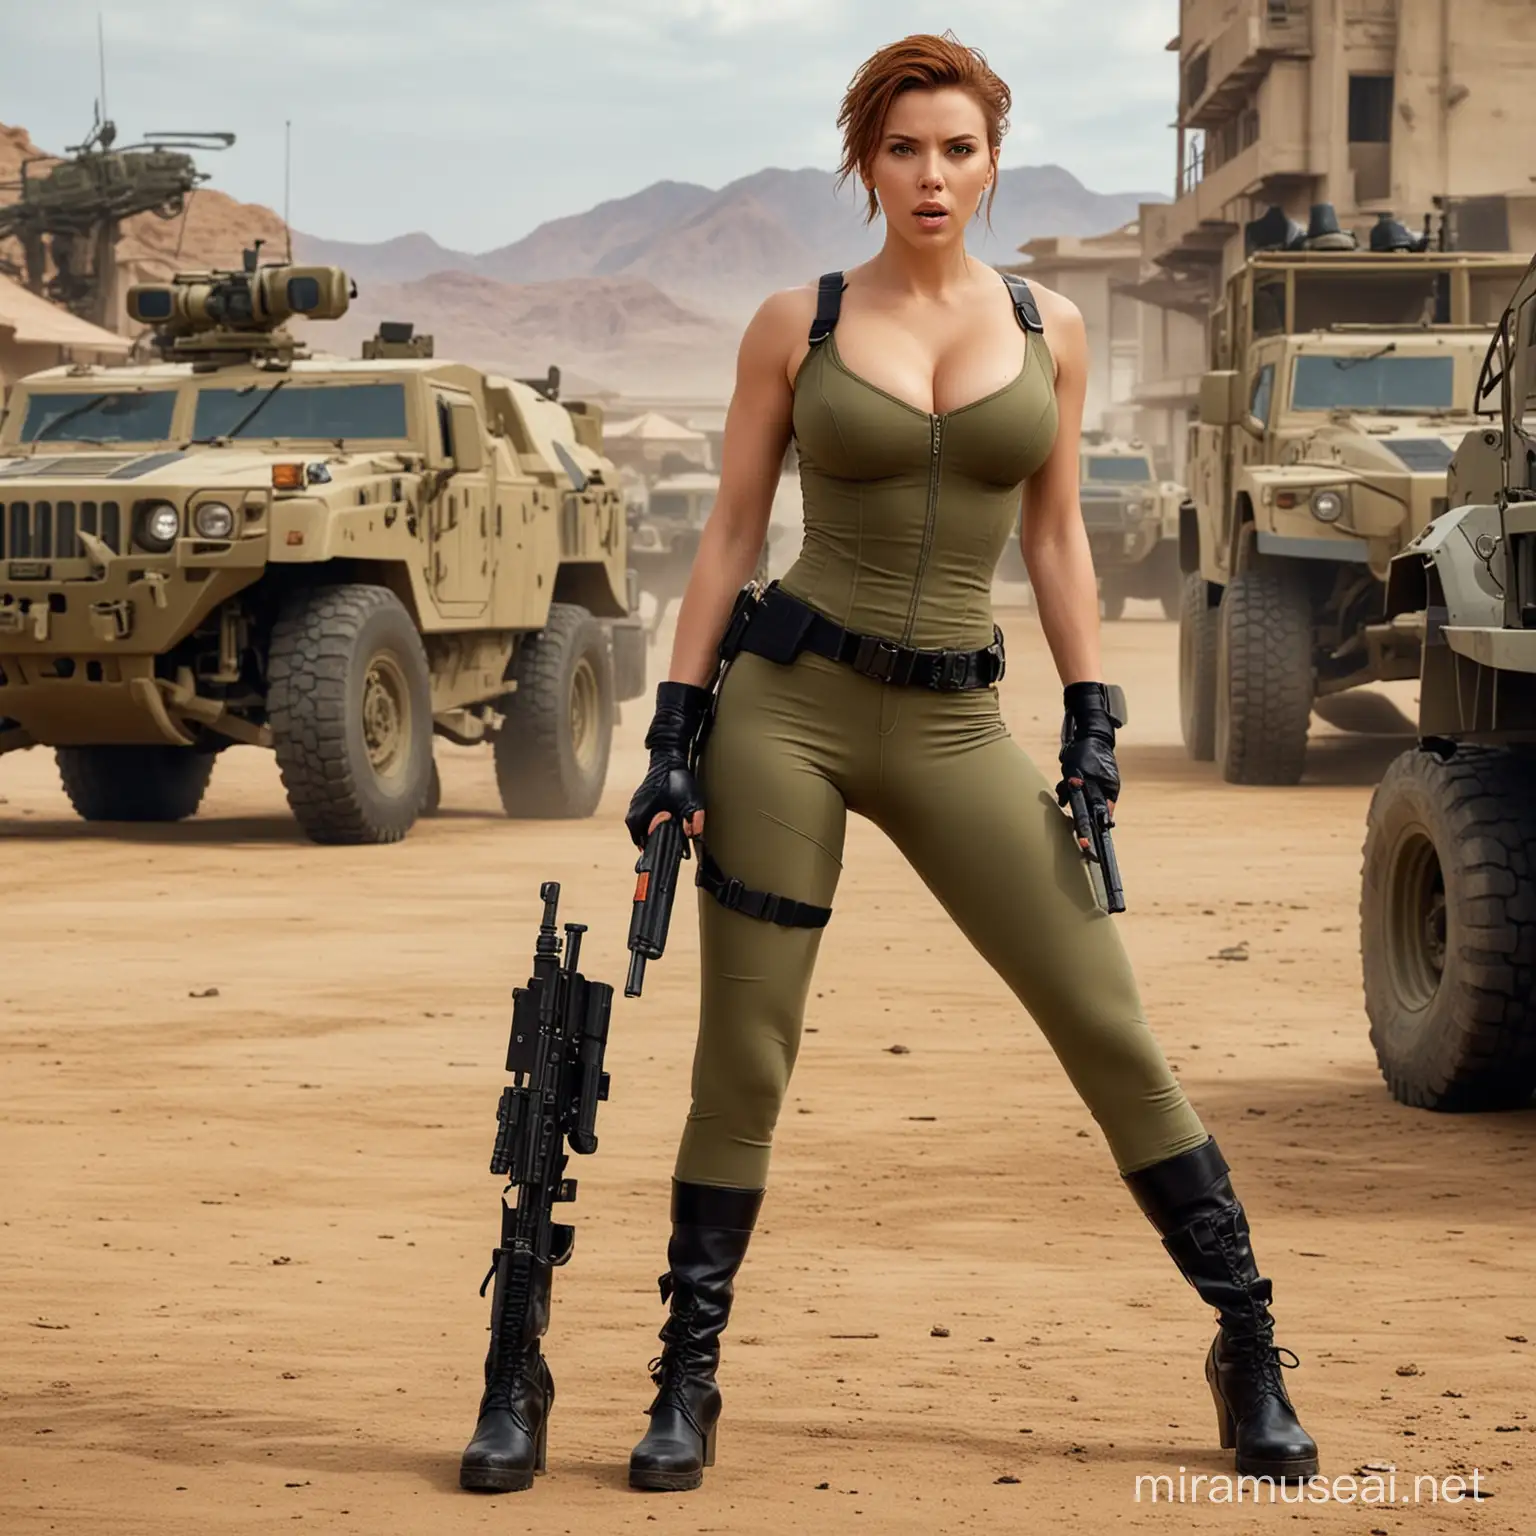 Scarlett Johansson as Lady Jaye from G.I.Joe, A woman strikes with her foot, the leg is lifted above the head, full body, athletic body, Female muscles, action pose, big breasts, bikini, There is a variety of military equipment in the background, big muscles thighs